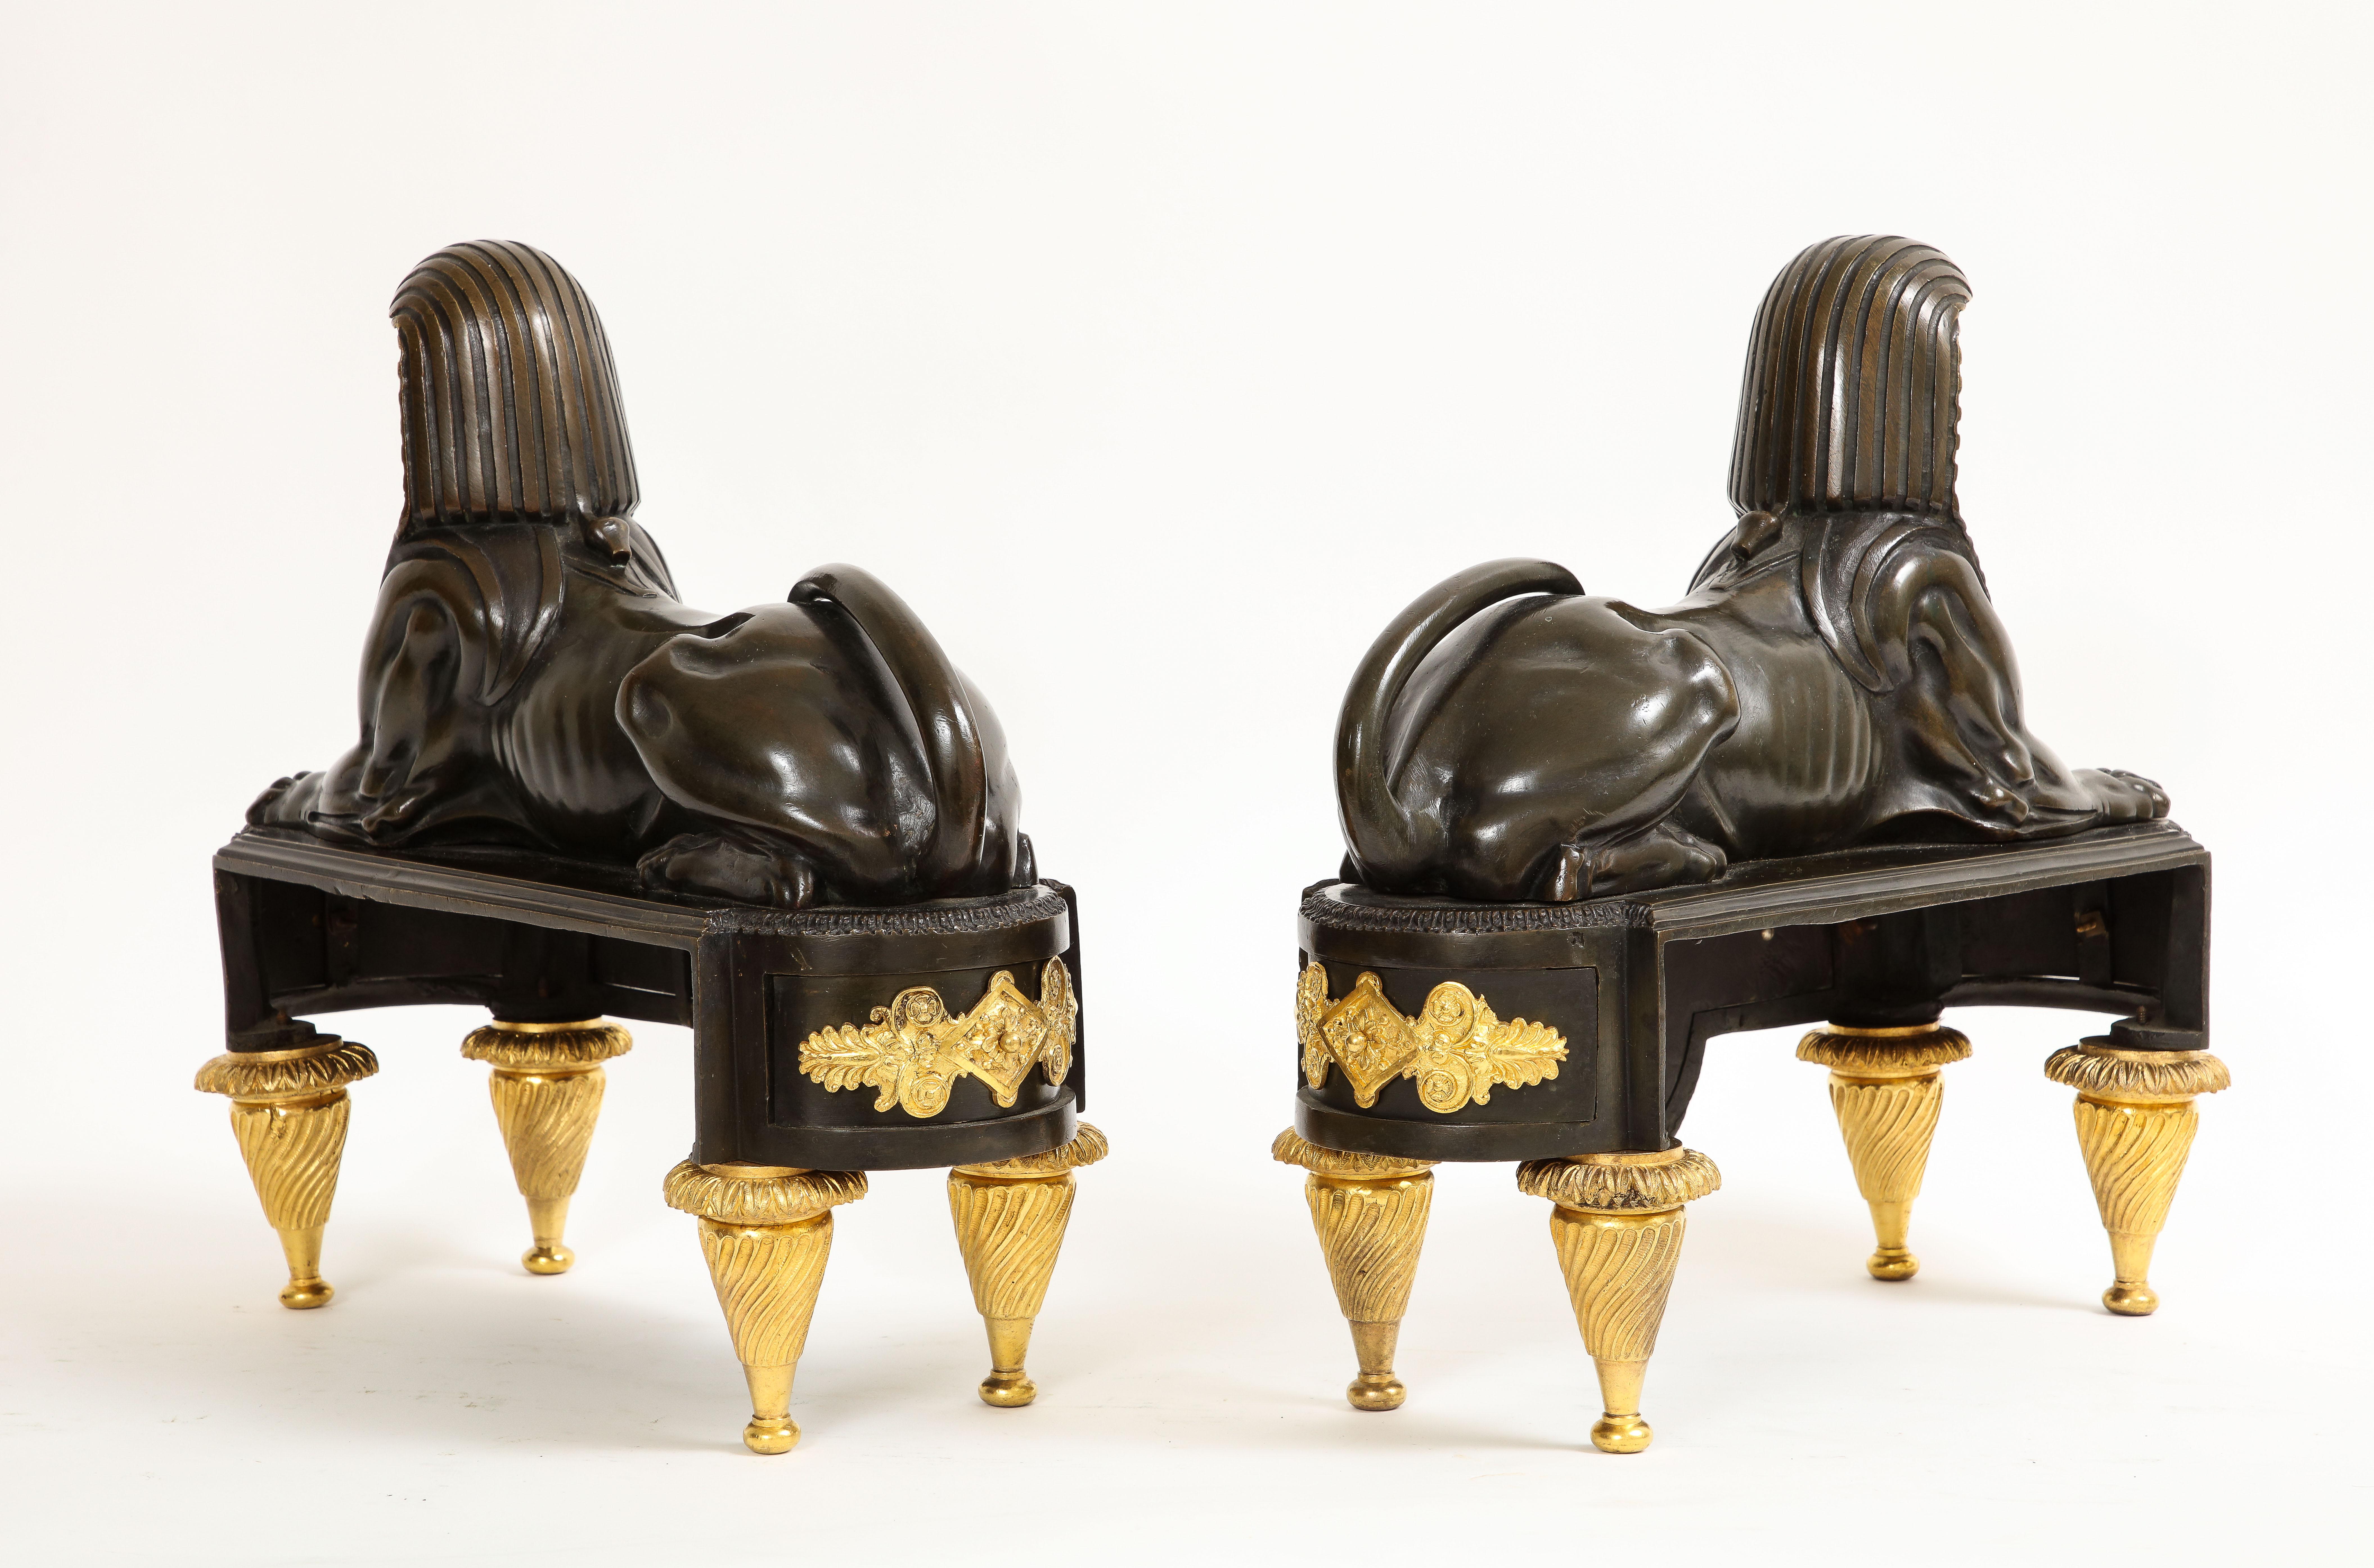 Pair of French Early 19th C. Patinated and Dore Bronze Egyptian Revival Chenets In Good Condition For Sale In New York, NY